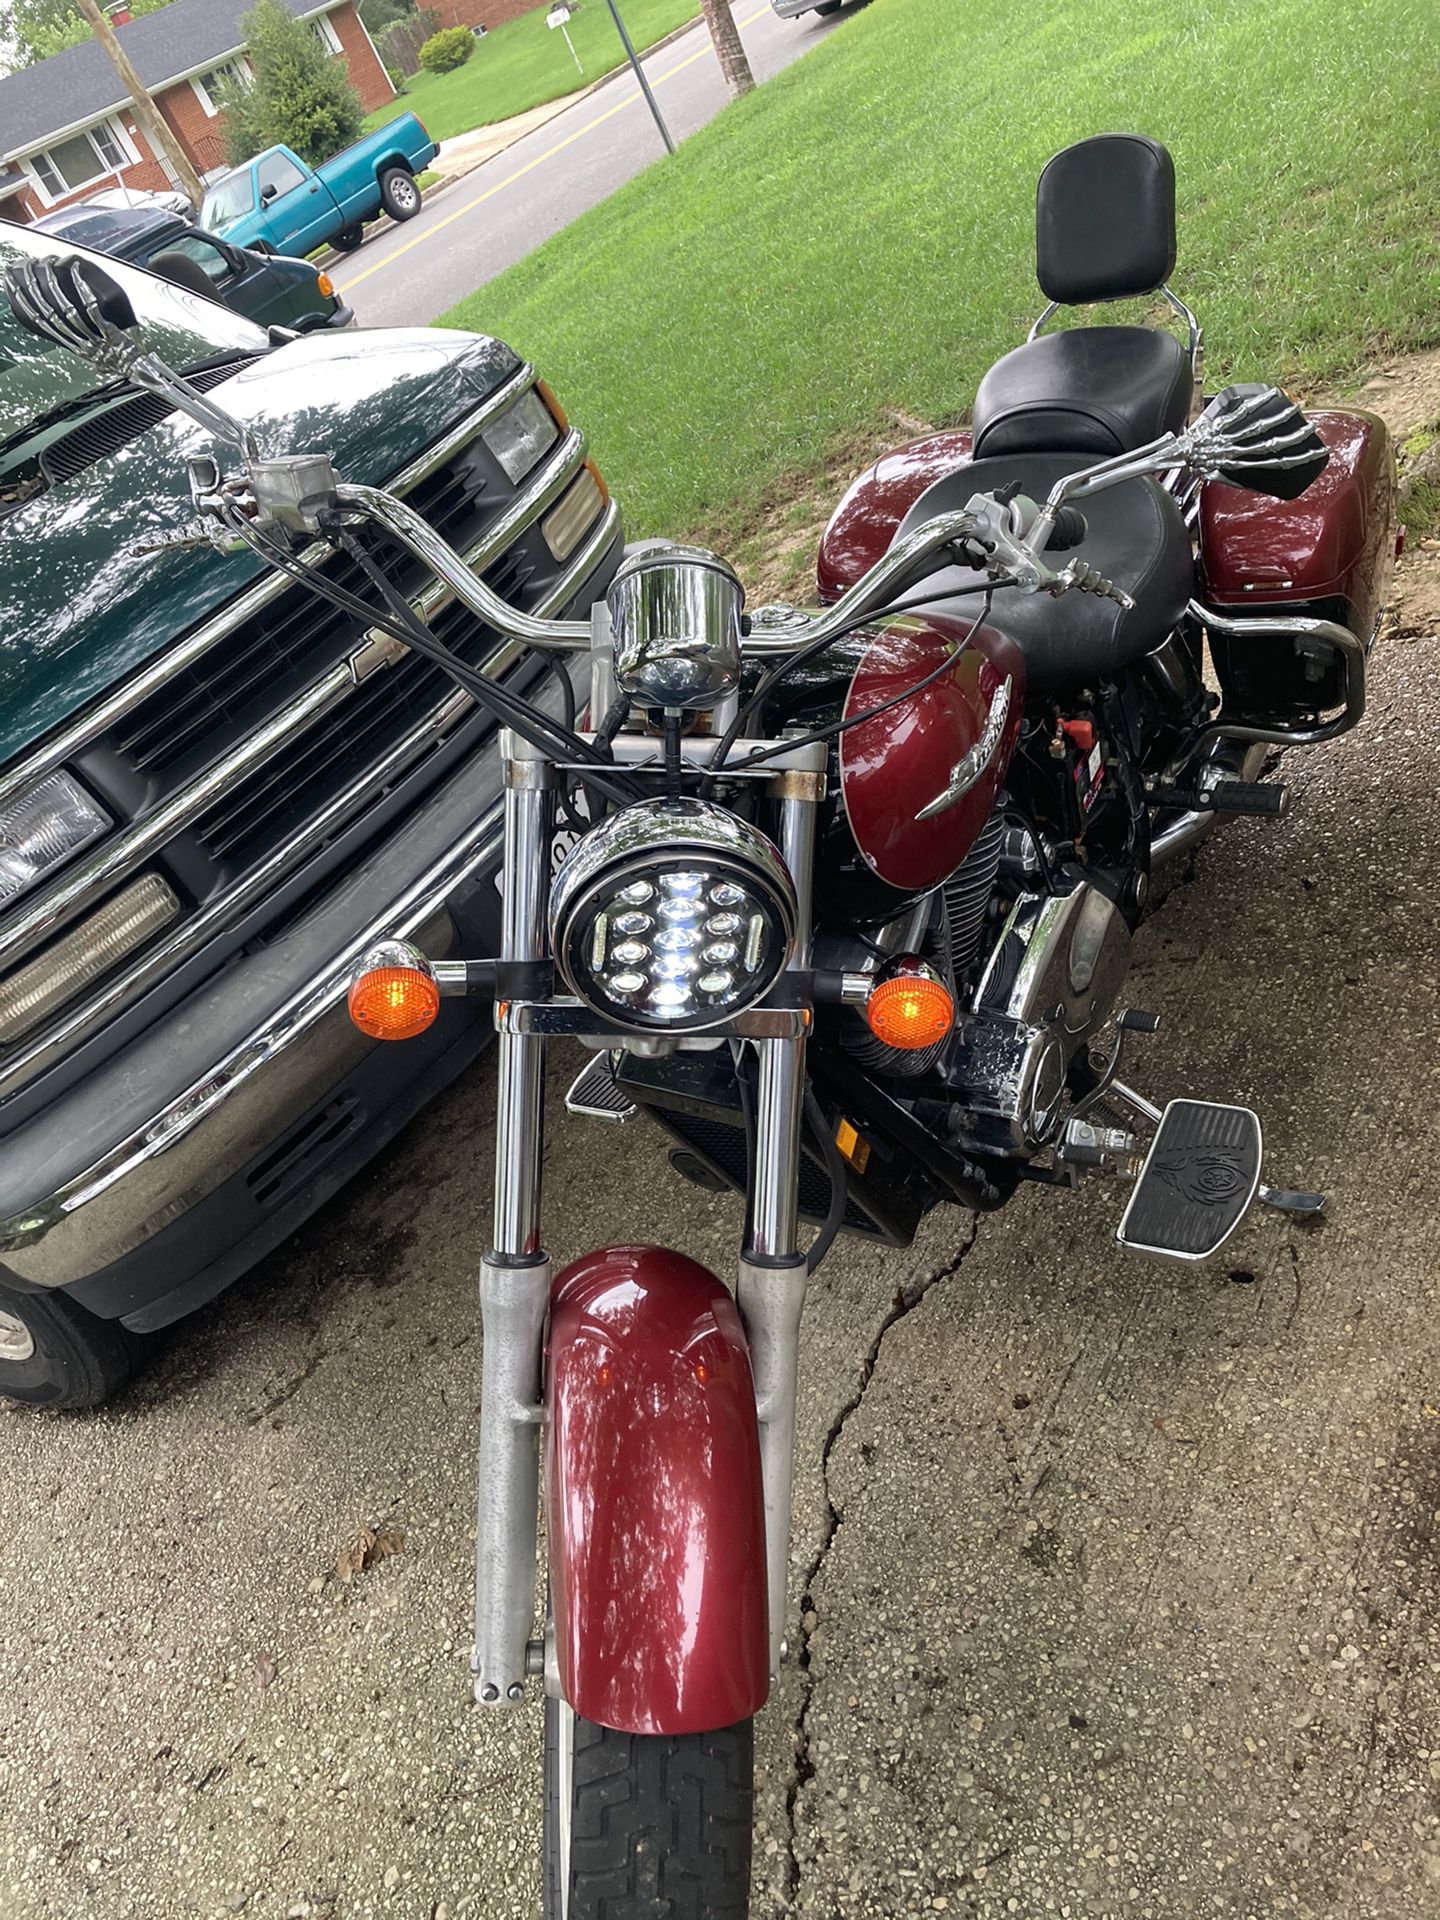 1999 Honda shadow 750 ace with clean tittle